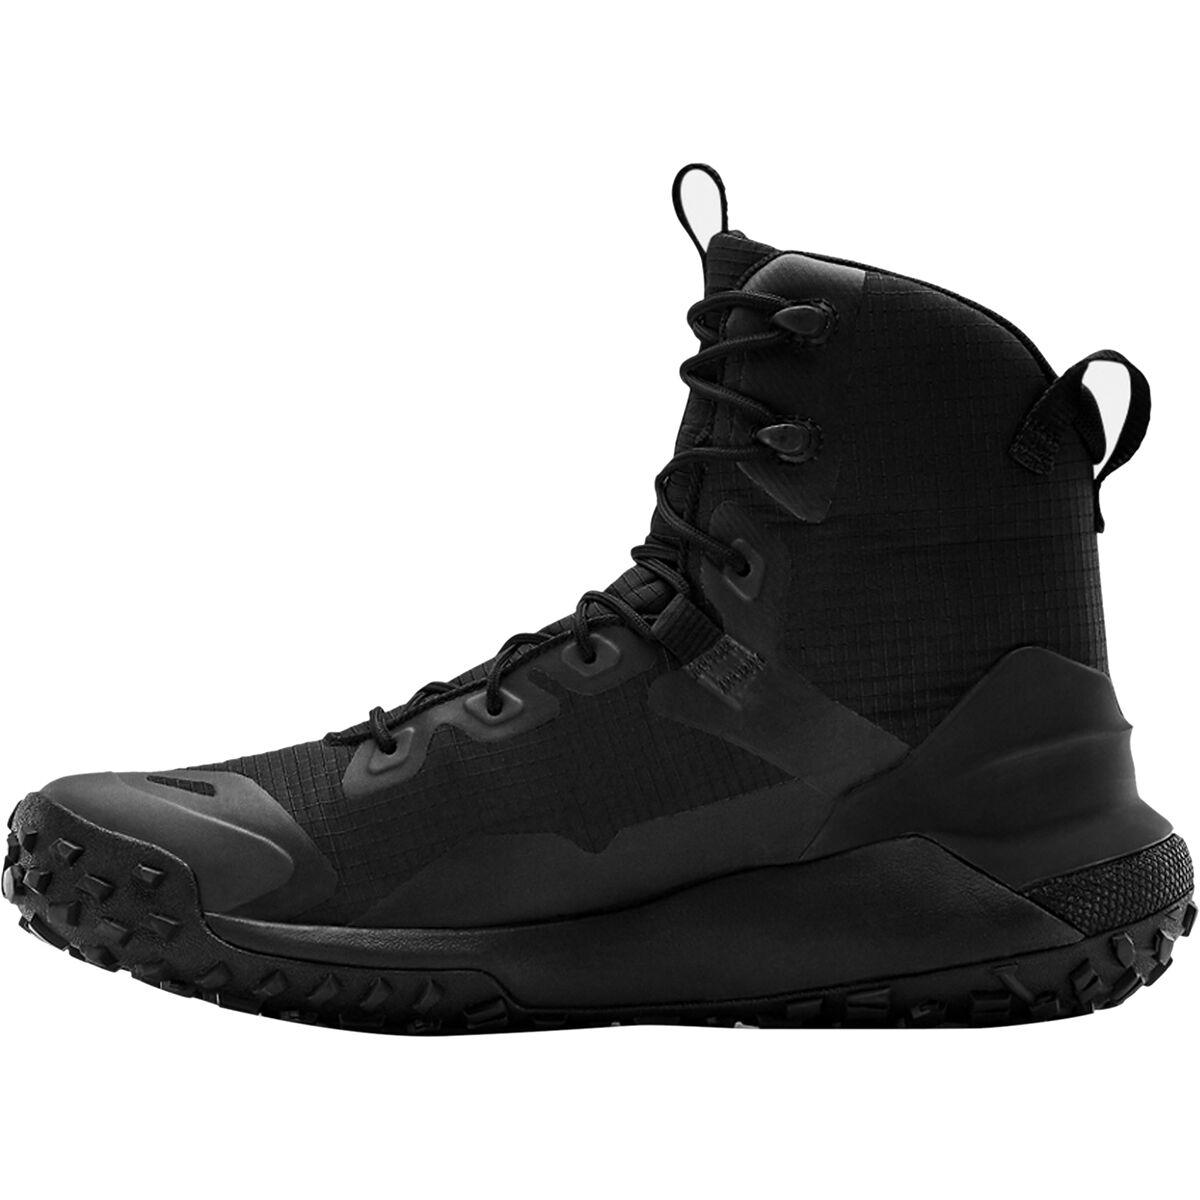 Under Armour HOVR Dawn WP Hiking Boot - Men's - Footwear